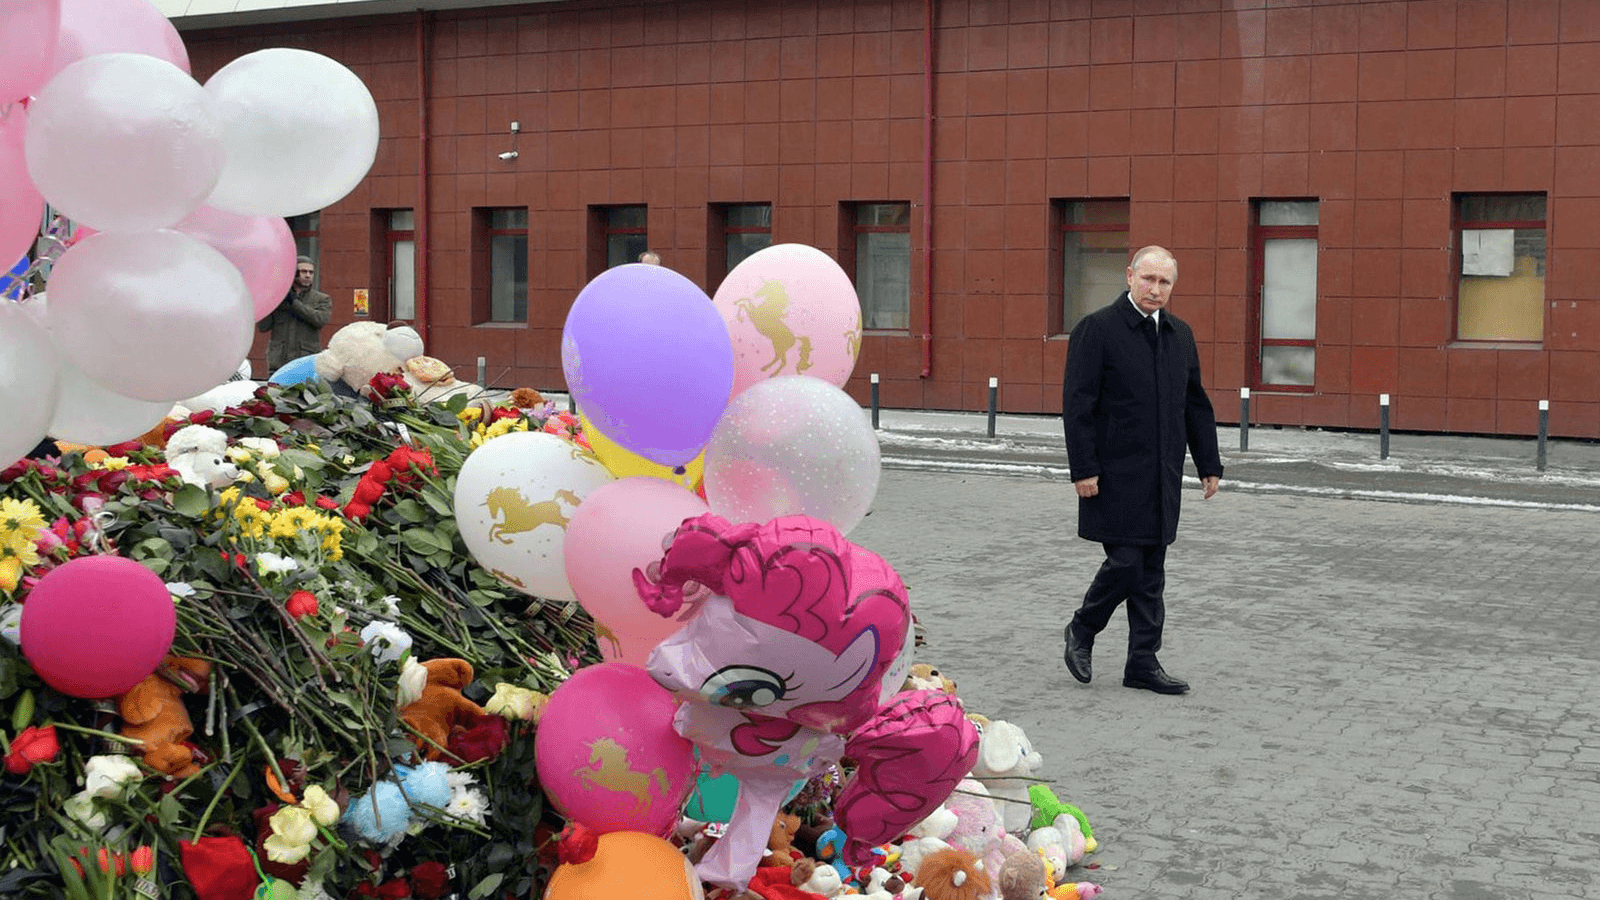 Russian President Vladimir Putin visits the site of fire, that killed at least 64 people at a busy shopping mall, in Kemerovo, Russia, March 27, 2018.